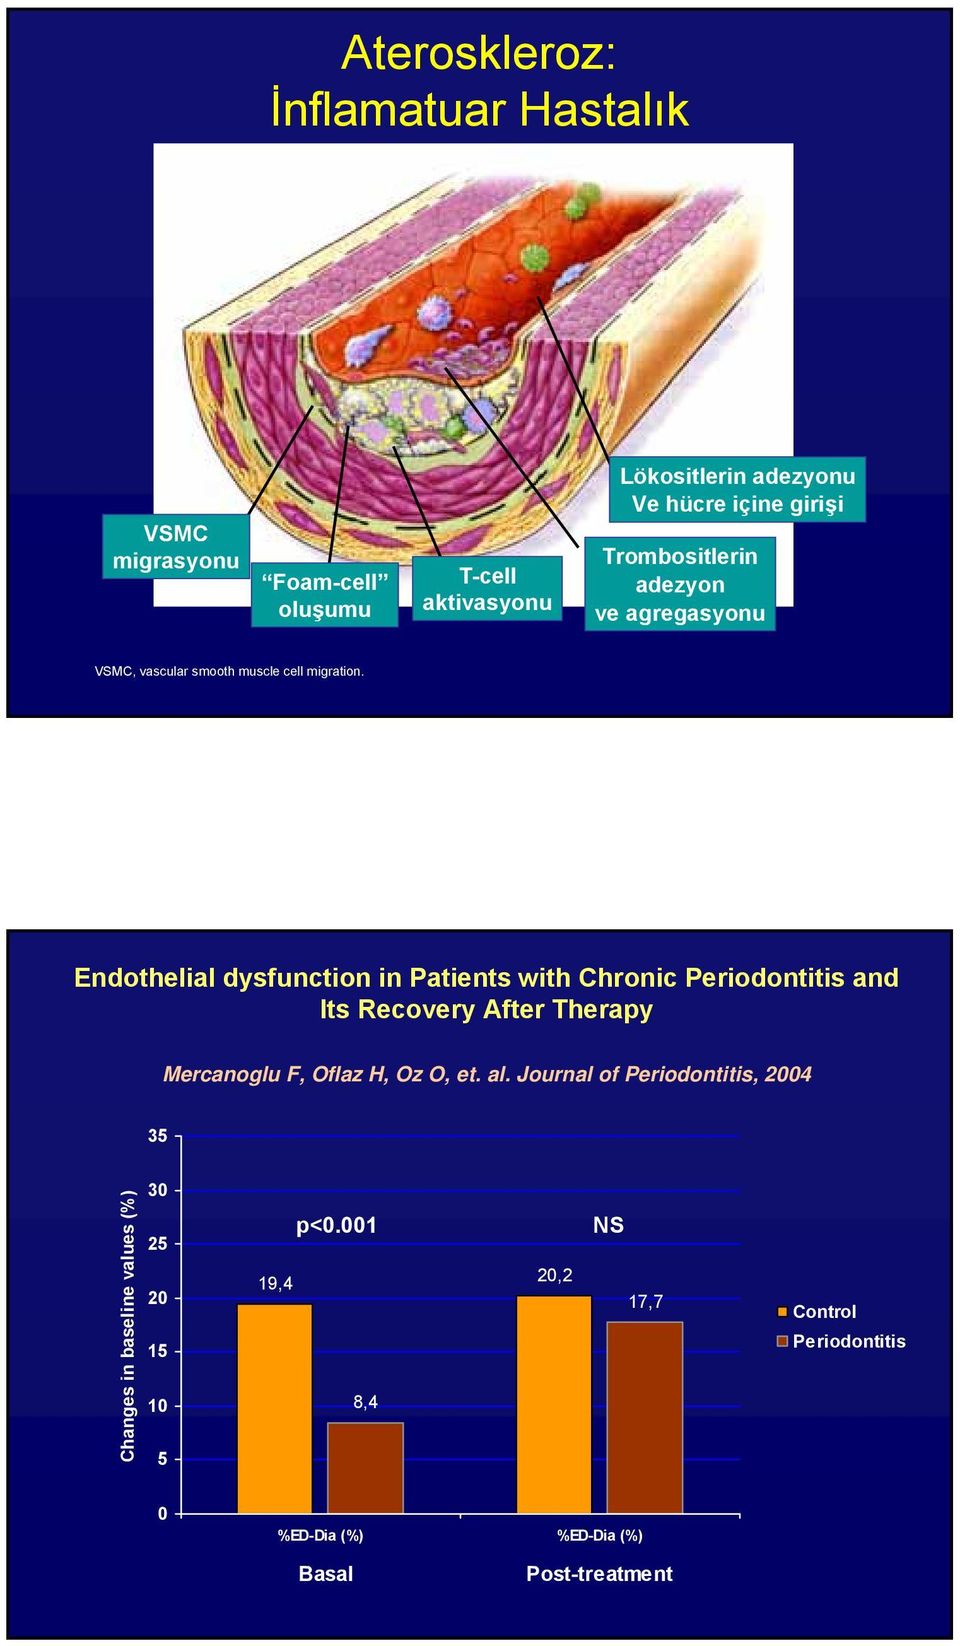 Endothelial dysfunction in Patients with Chronic Periodontitis and Its Recovery After Therapy Mercanoglu F, Oflaz H, Oz O, et.